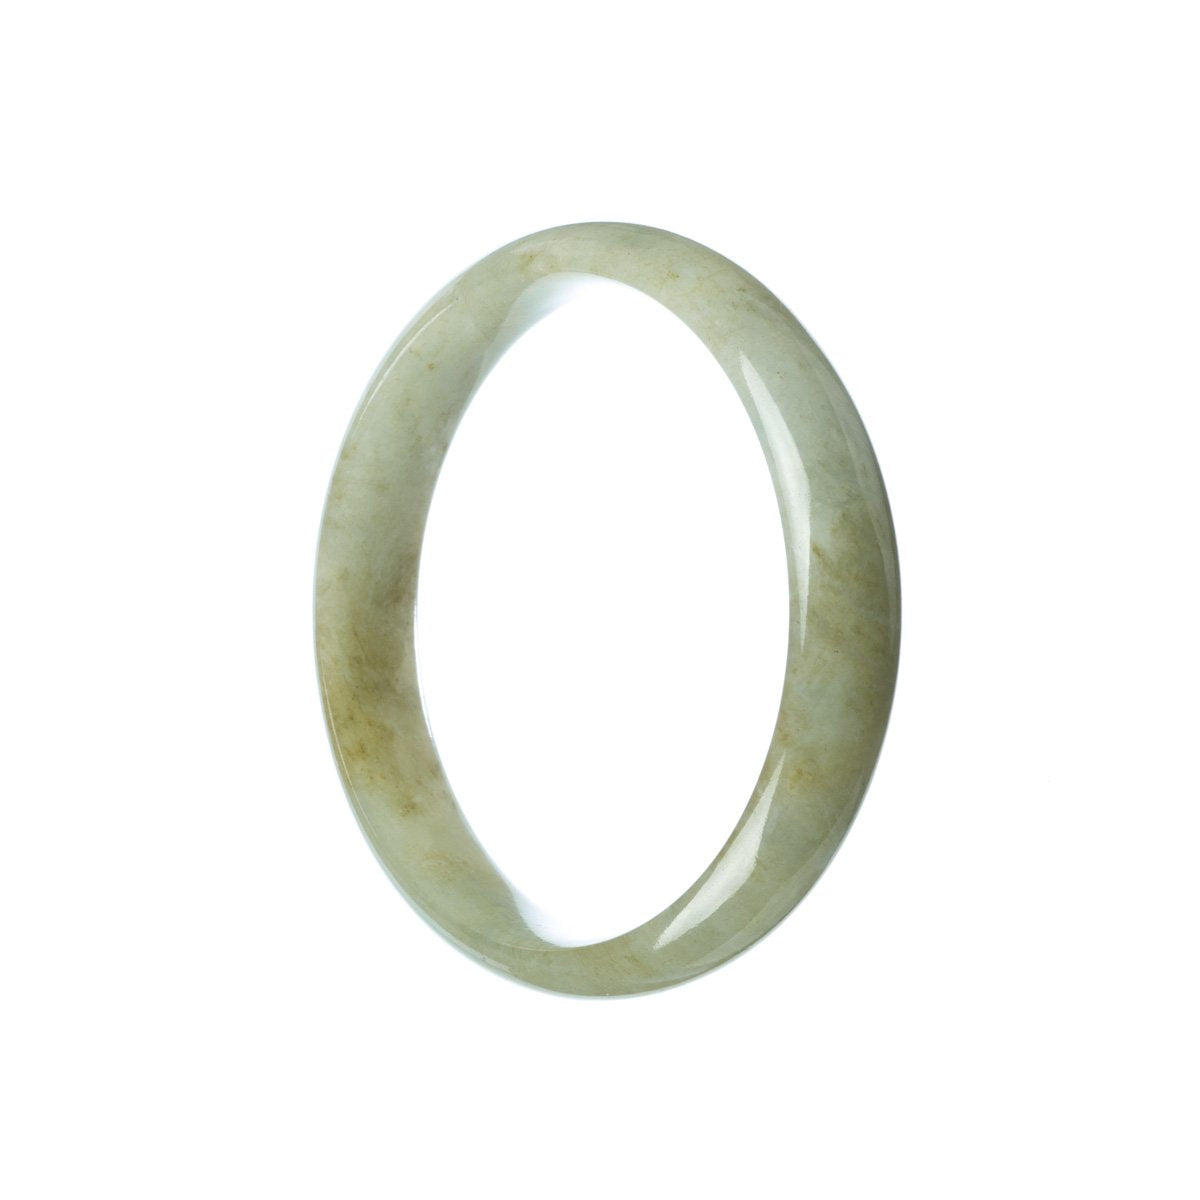 A close-up image of a pale green jade bangle with a traditional half moon shape, measuring 57mm in size. The bangle appears untreated and showcases the natural beauty of the jade.